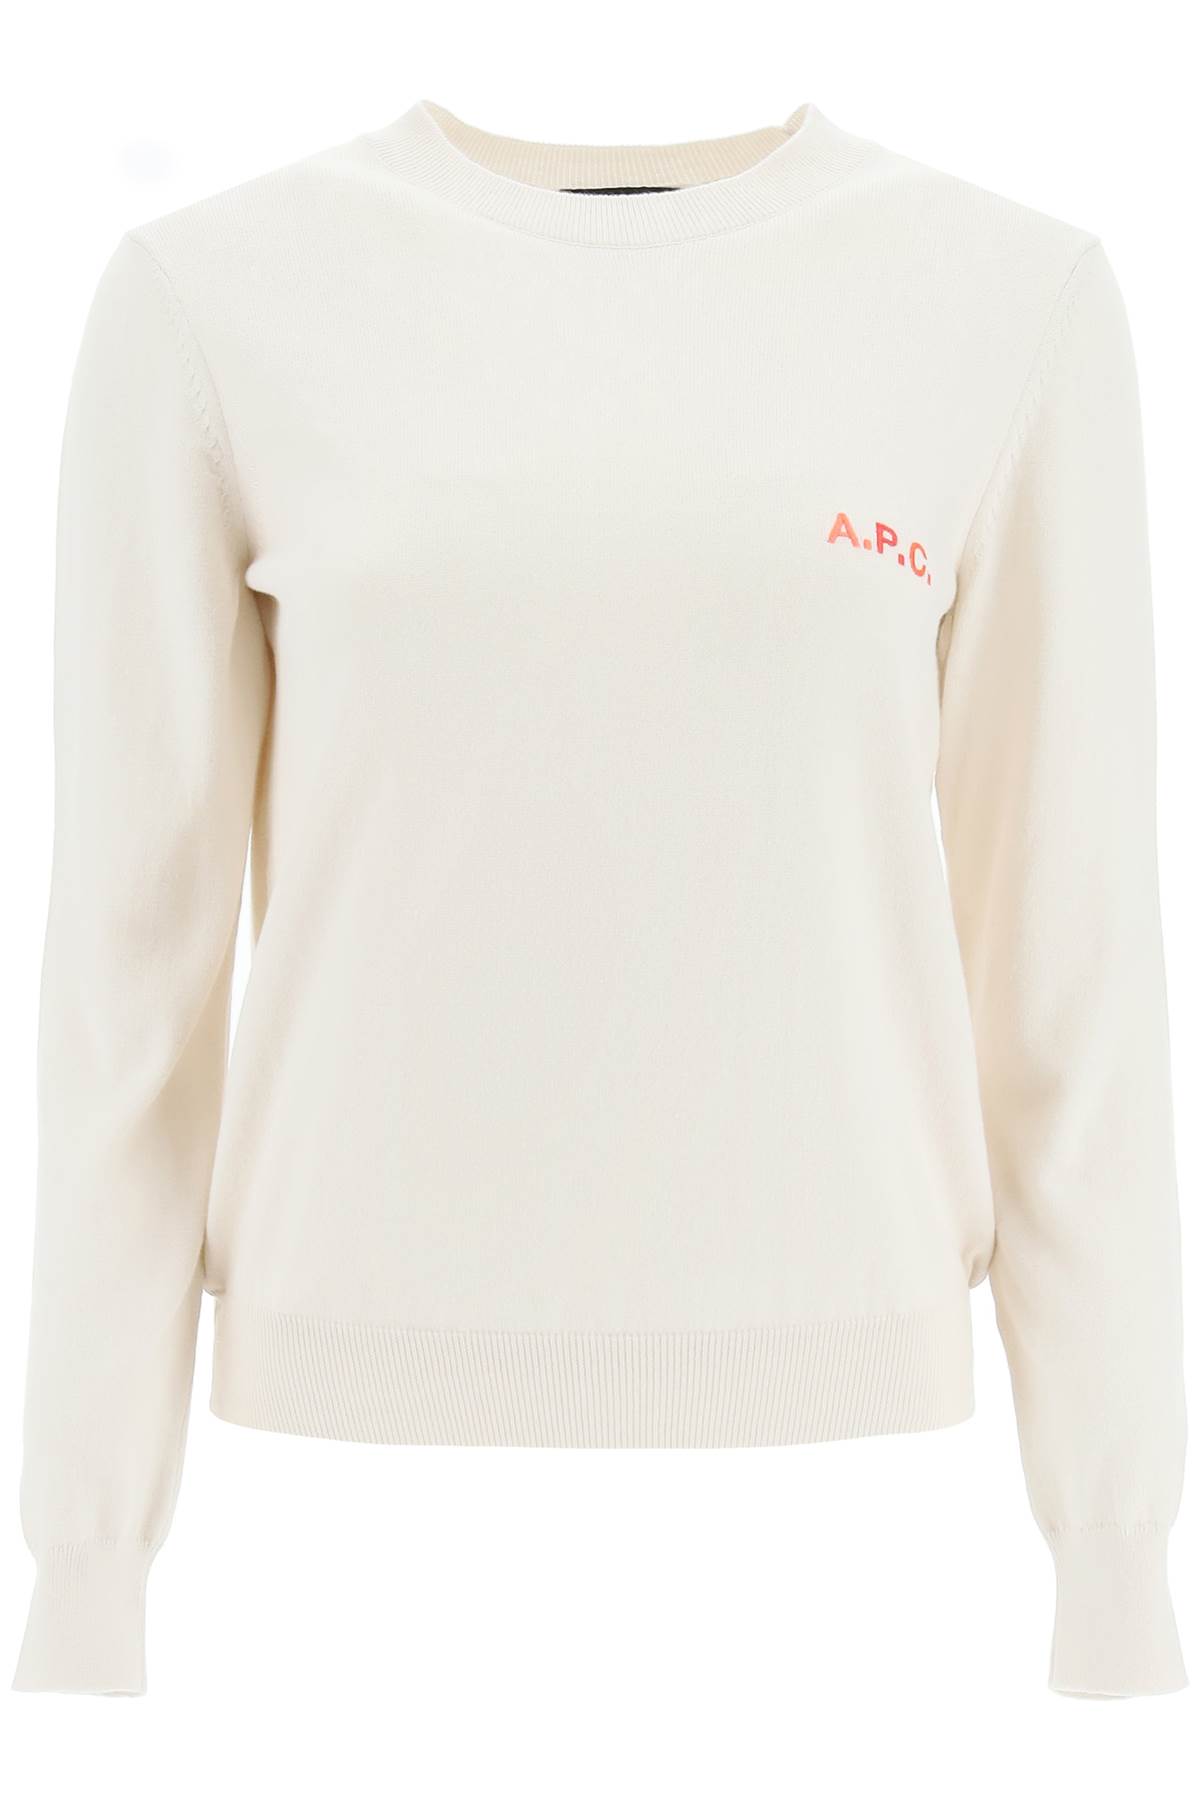 APC PULLOVER WITH EMBROIDERED LOGO